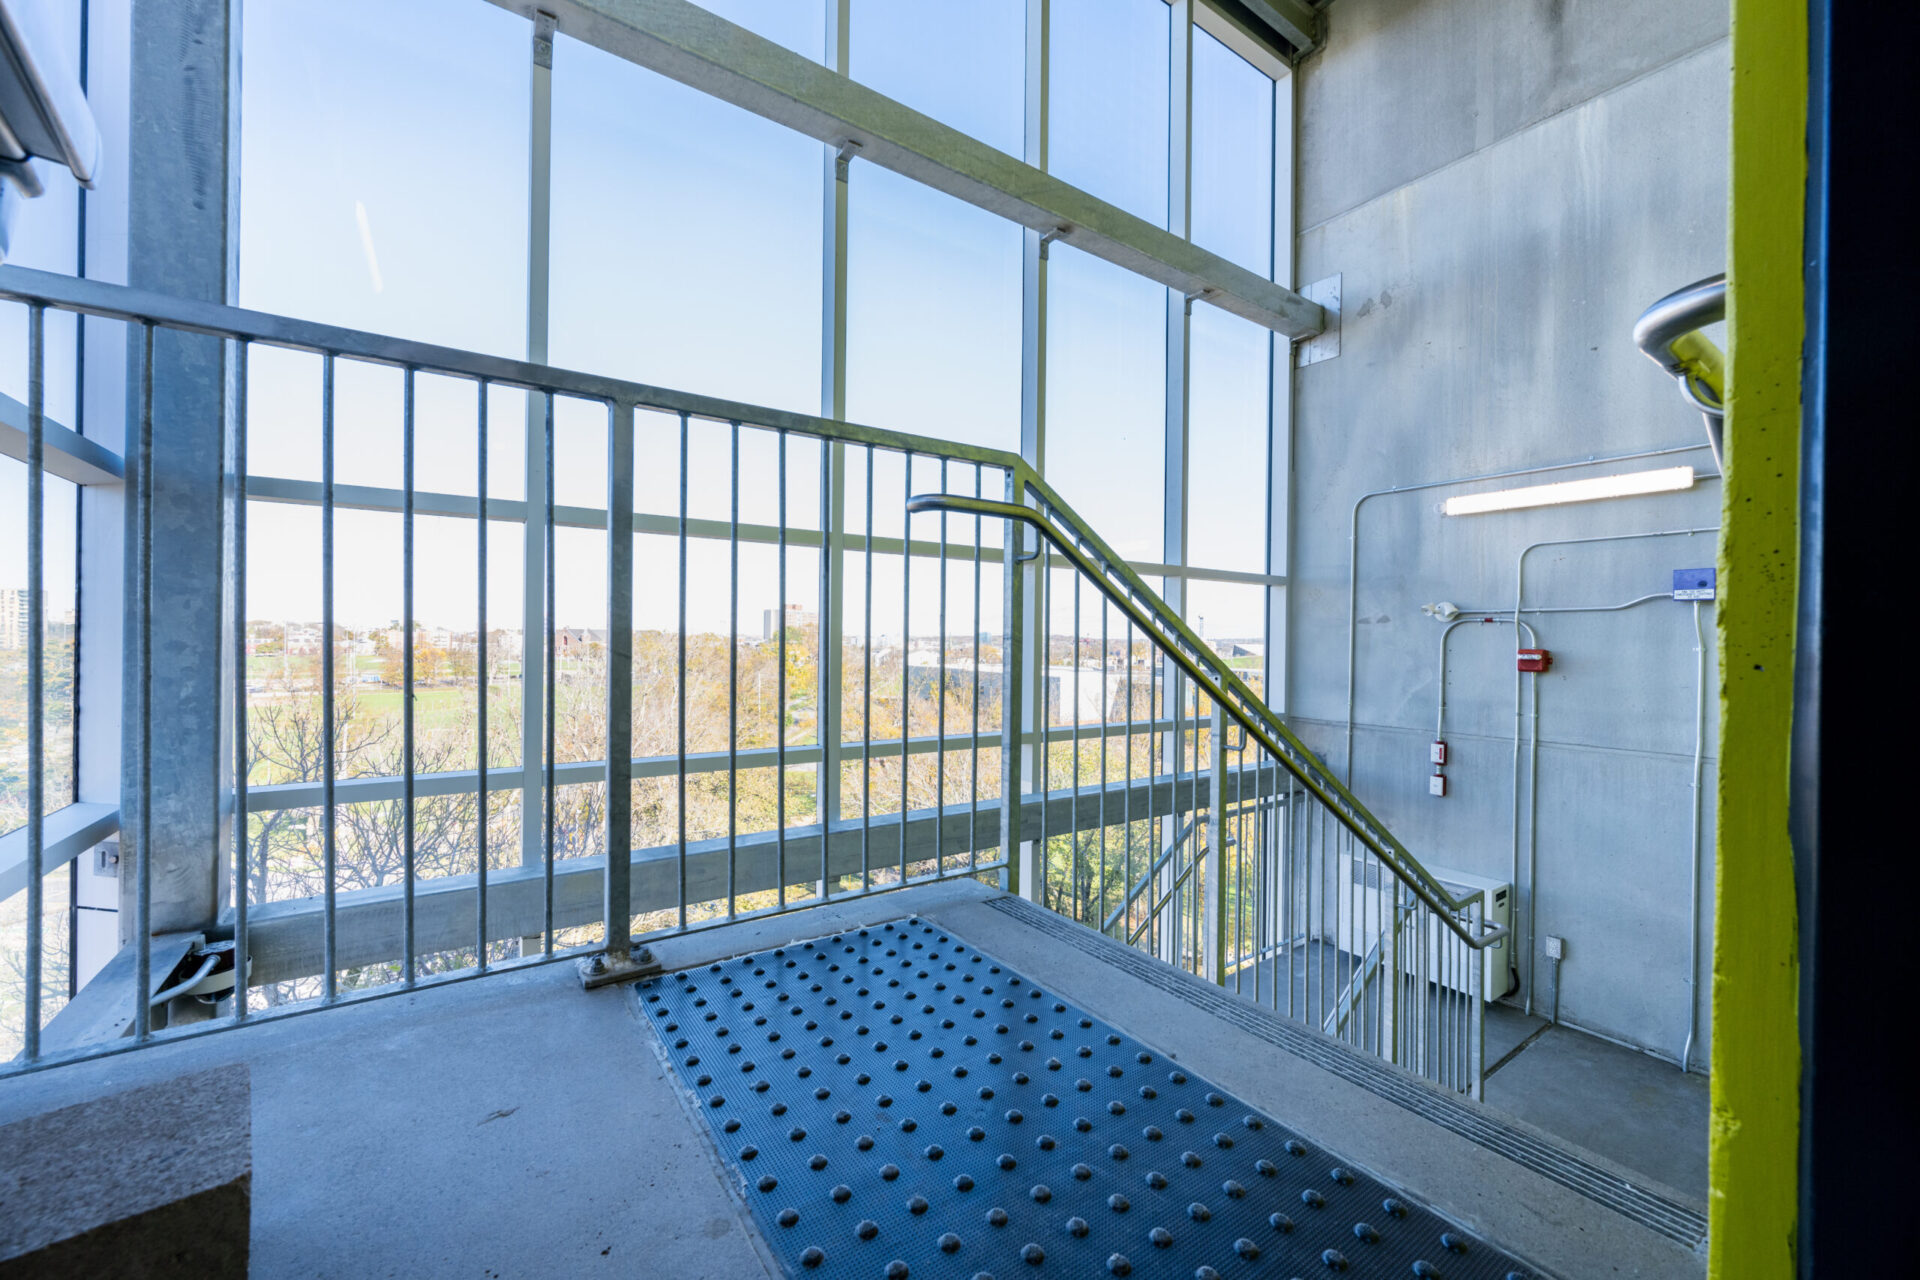 A metal railing in a staircase emphasizing architecture.
